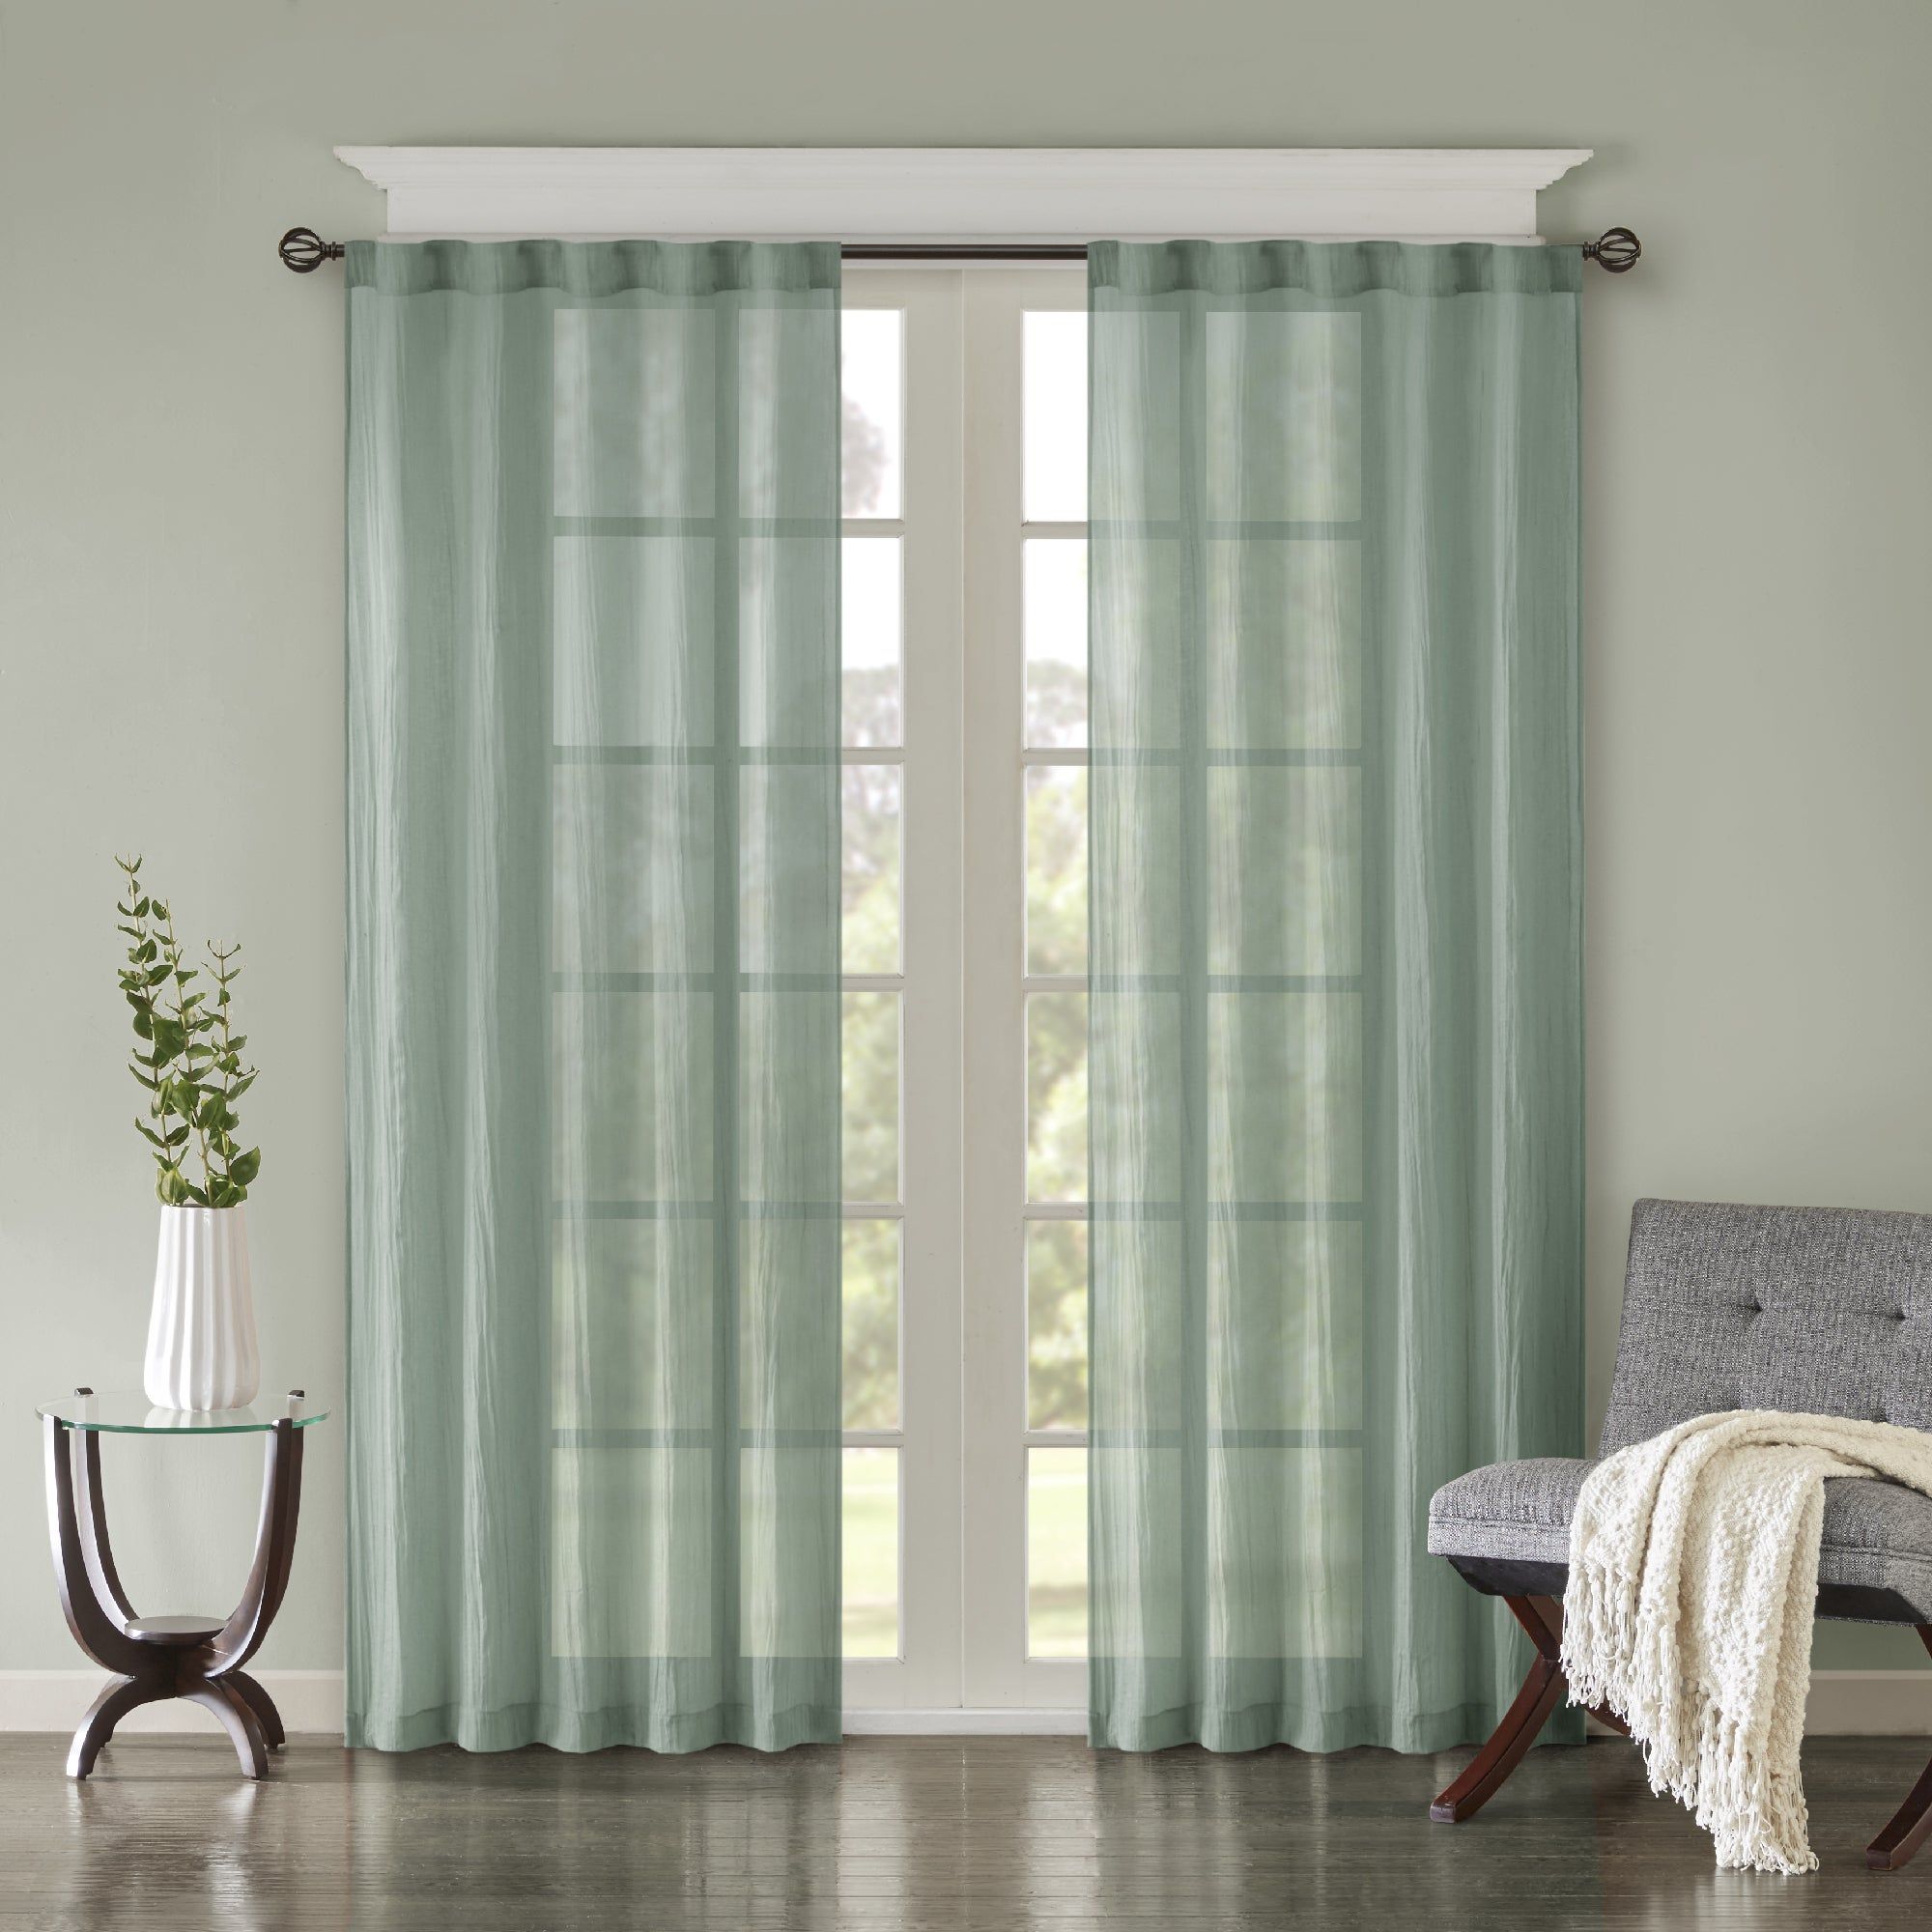 Madison Park Kaylee Solid Crushed Sheer Window Curtain Pair In Kaylee Solid Crushed Sheer Window Curtain Pairs (View 1 of 20)